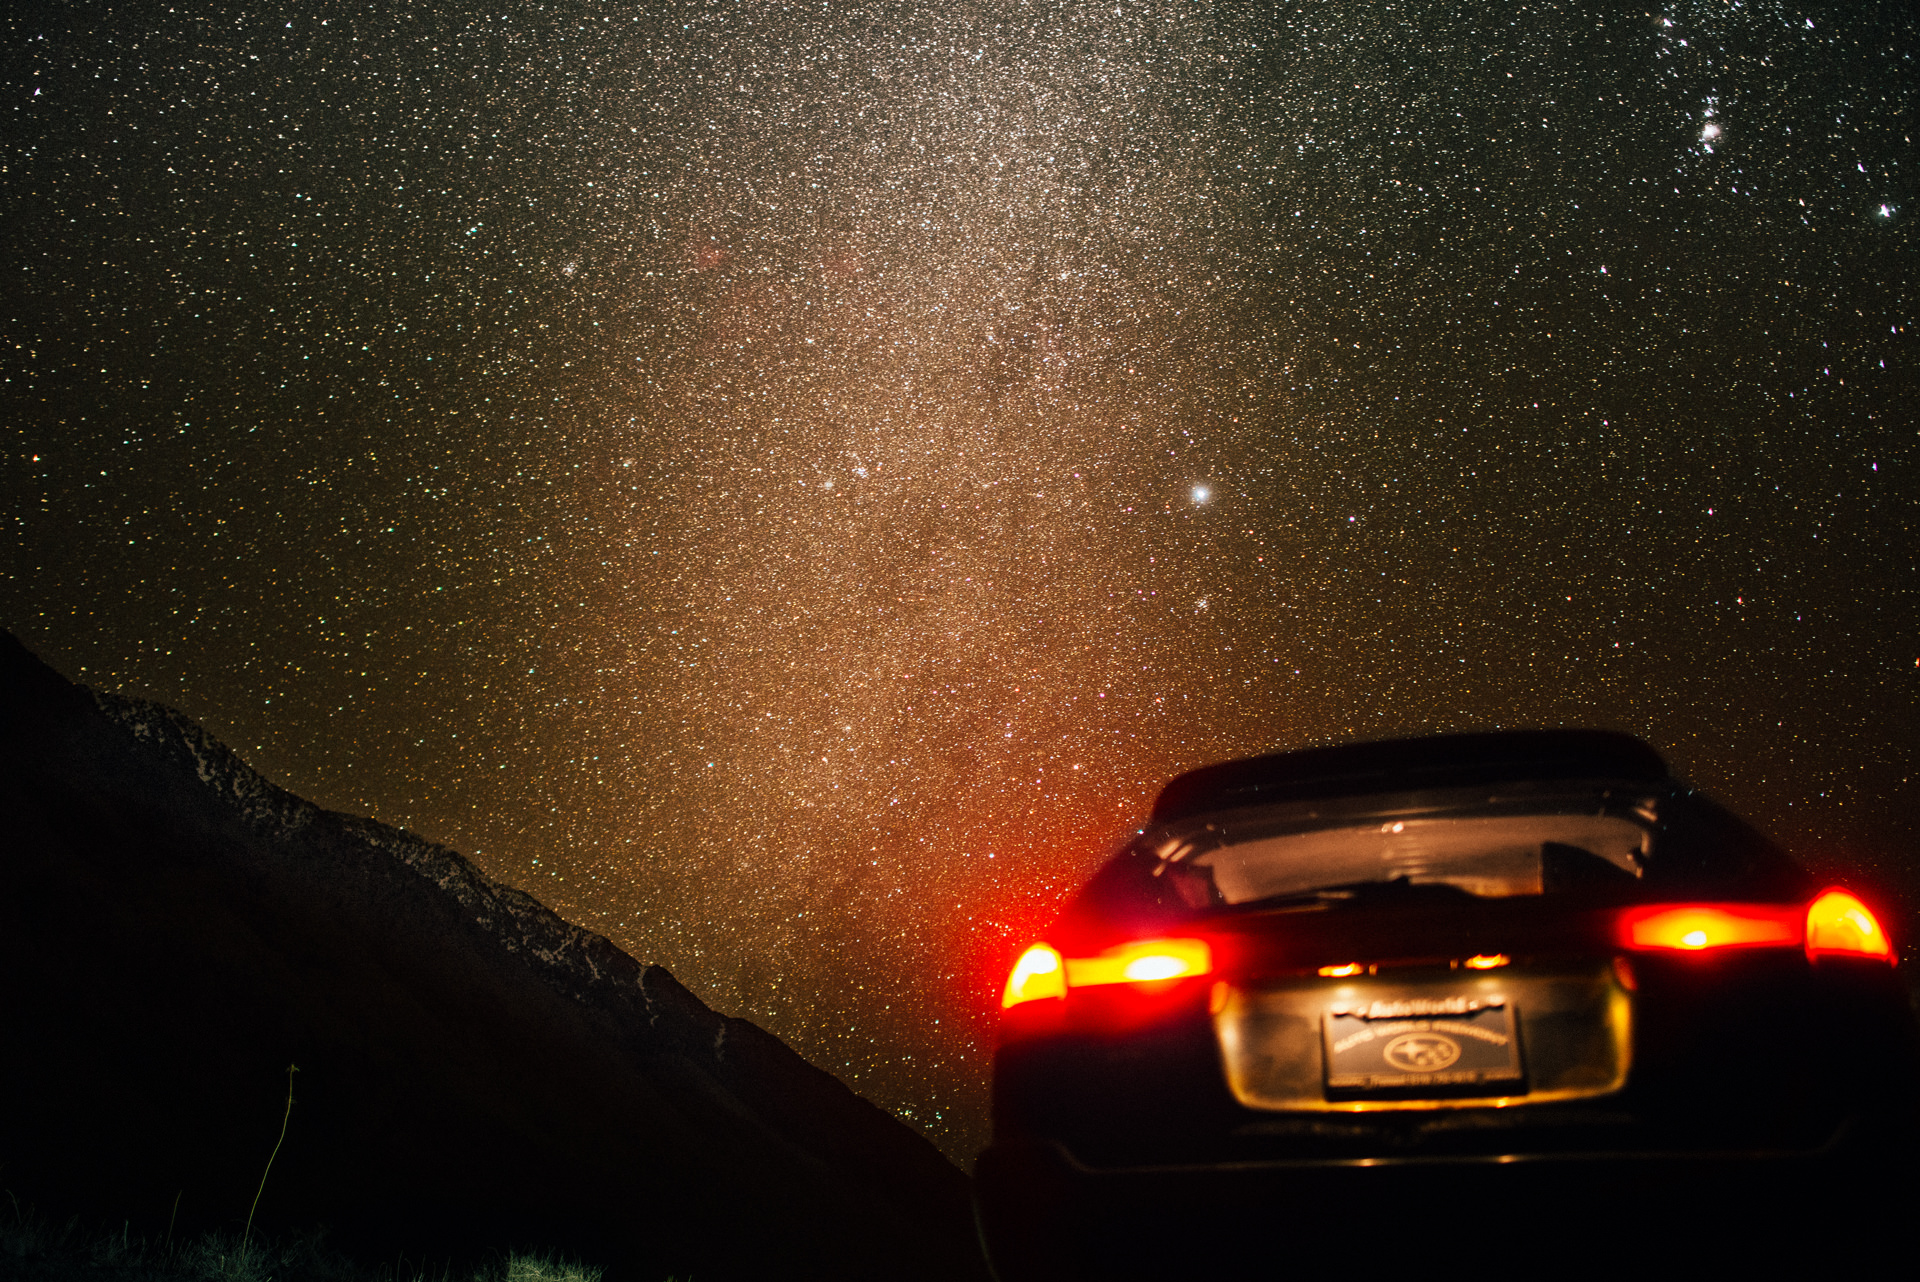 The Sky full of stars in a clear Night with a Subaru Legacy in the foreground at Death Valley, USA.